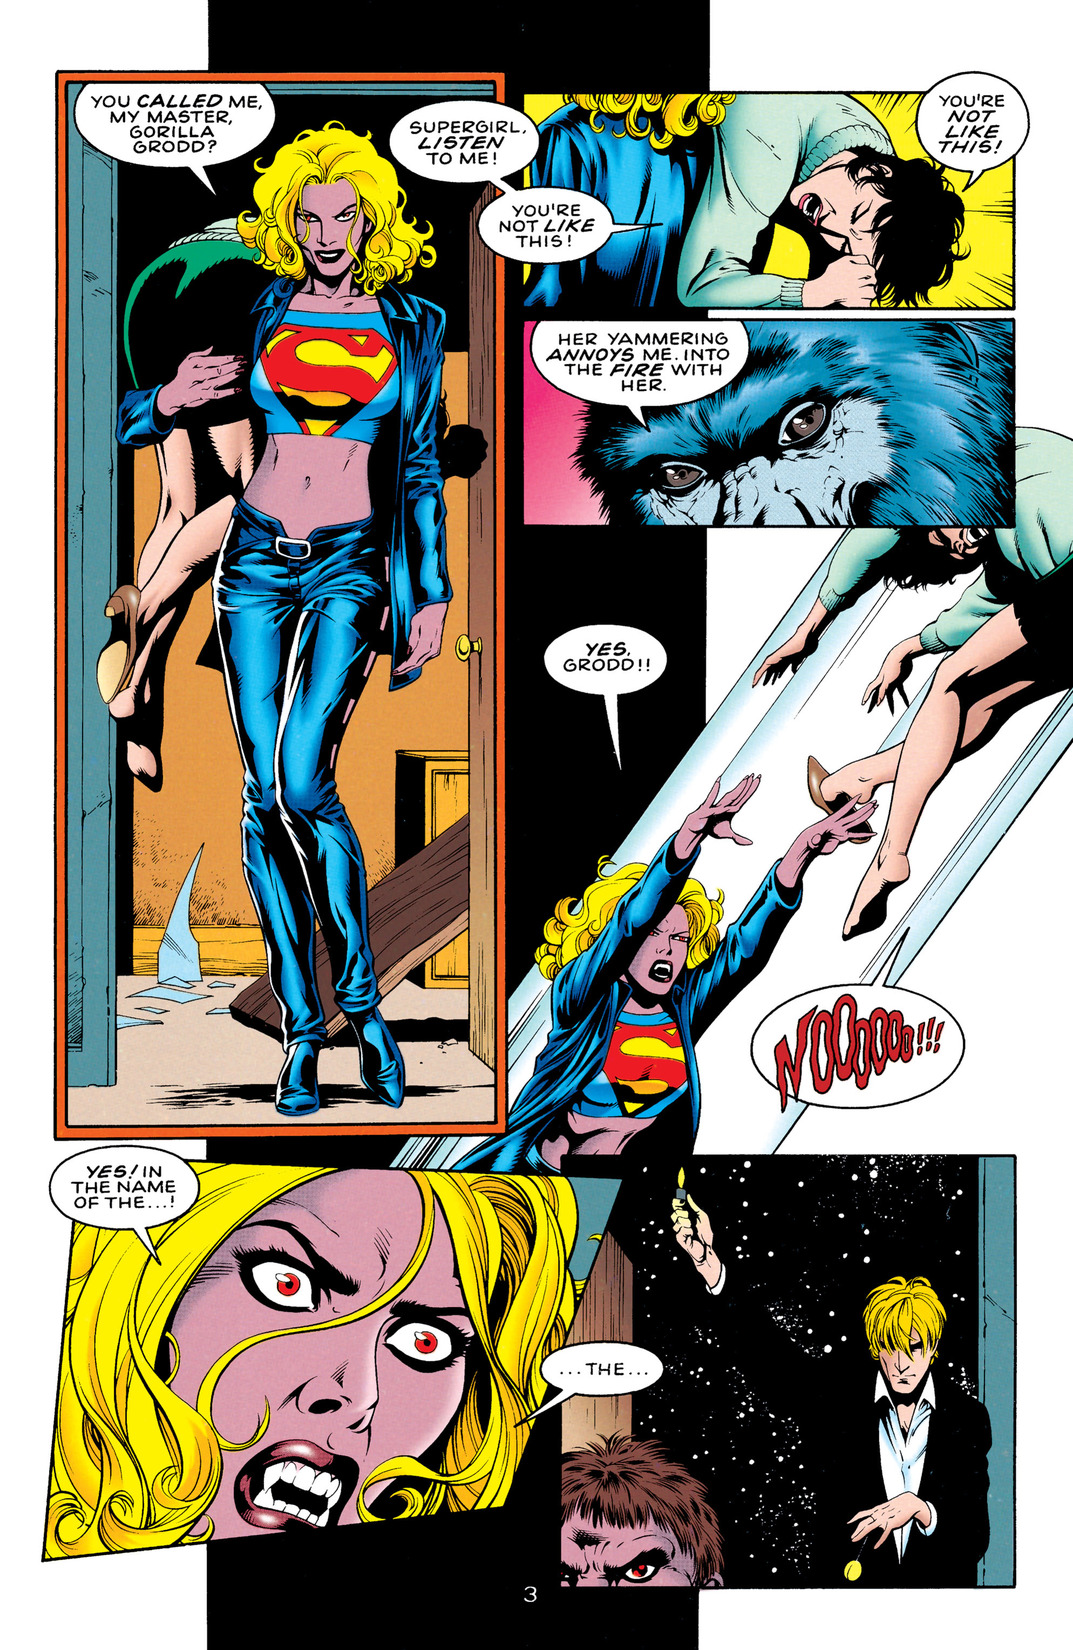 Supergirl (1996) 4 Page 3